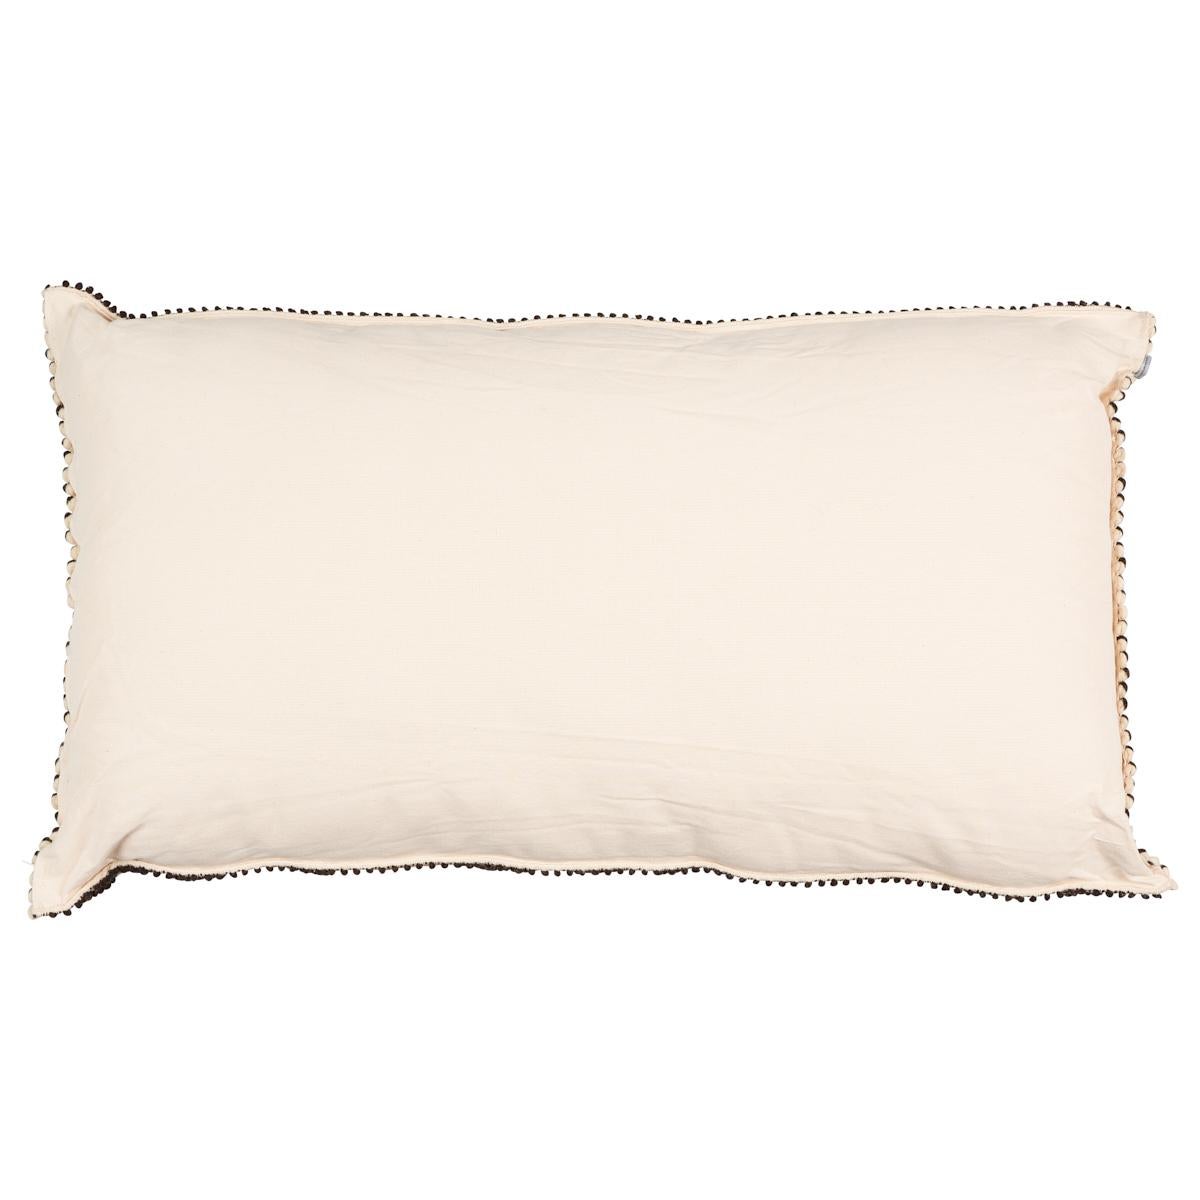 The Kara pillow is handwoven and crafted in Italy. Using traditional weaving techniques, these Sardinian pillows are a study in texture that demand to be admired. Pillow includes feather/down fill insert.

*If out of stock, lead-time is 15-20